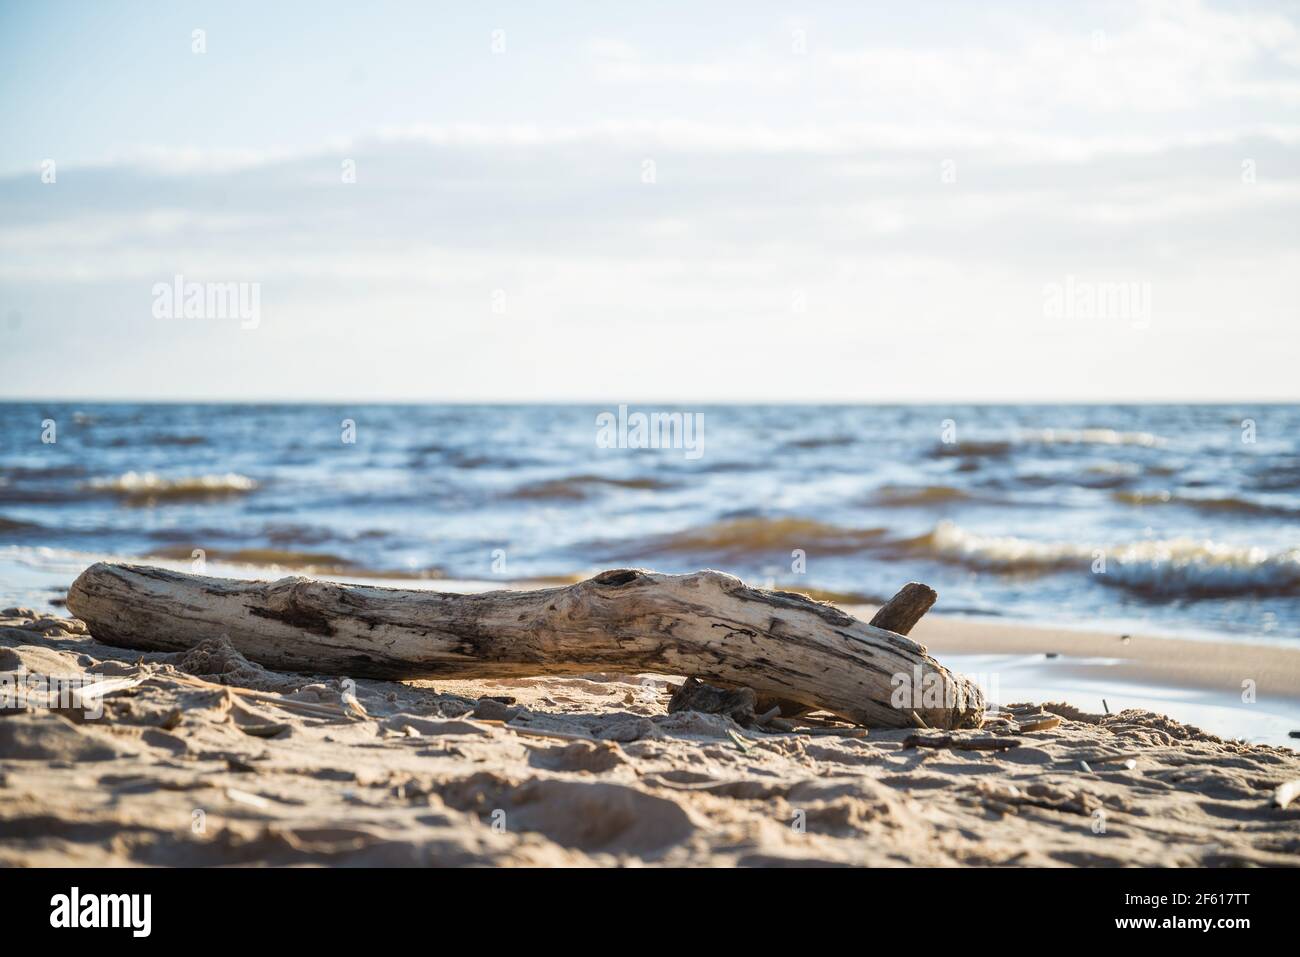 bark-free wooden log on the sea shore in the sand of the dune beach, which is illuminated by the warm spring sun. Beautiful landscape with blue sky. Stock Photo